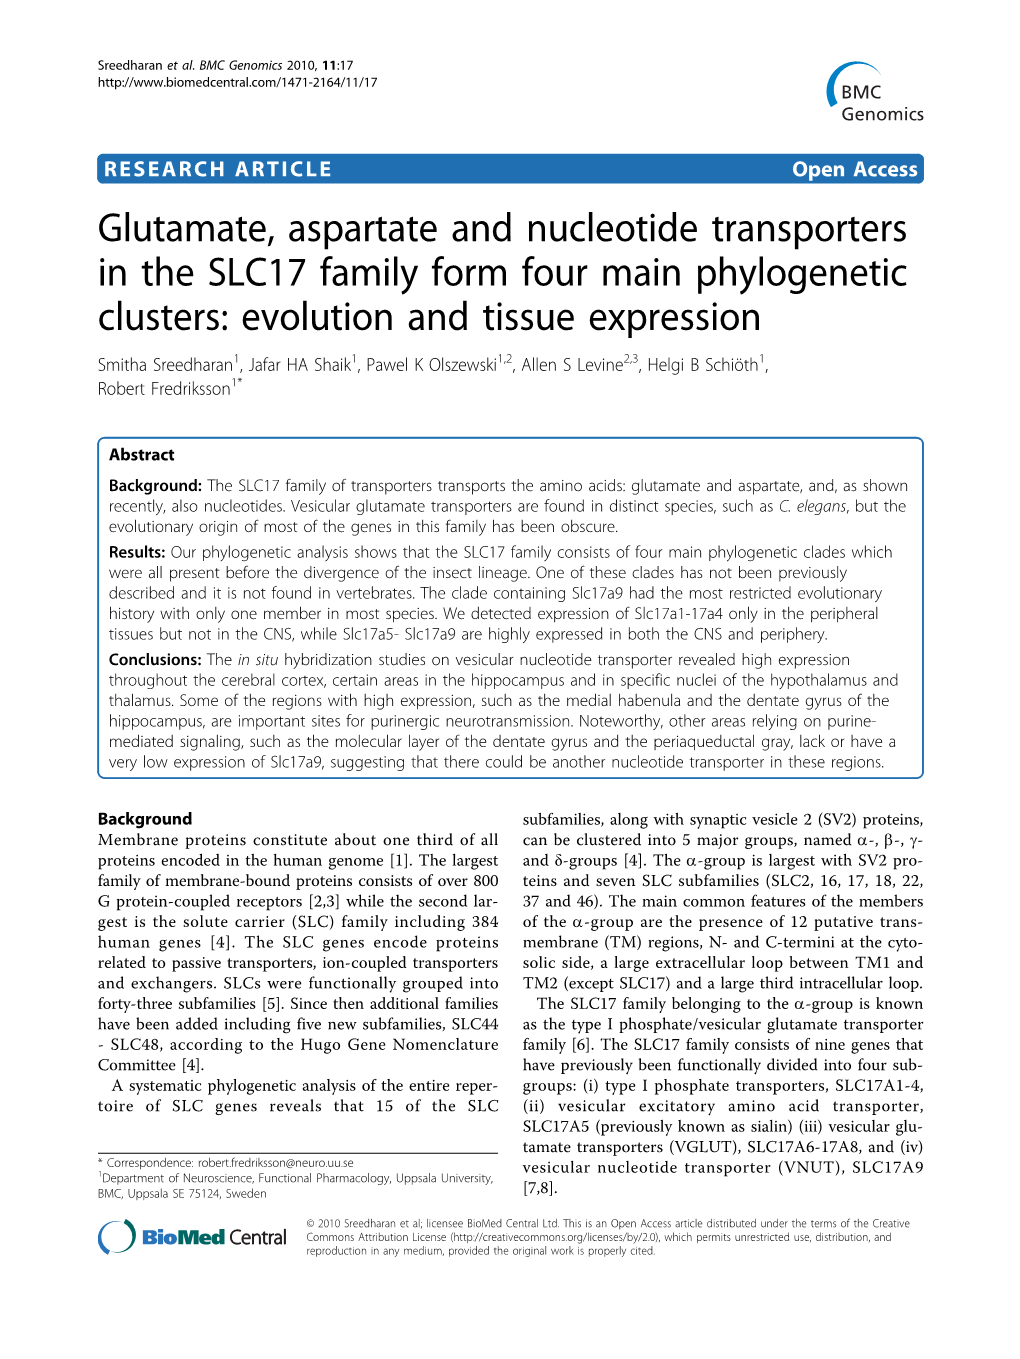 Glutamate, Aspartate and Nucleotide Transporters in the SLC17 Family Form Four Main Phylogenetic Clusters: Evolution and Tissue